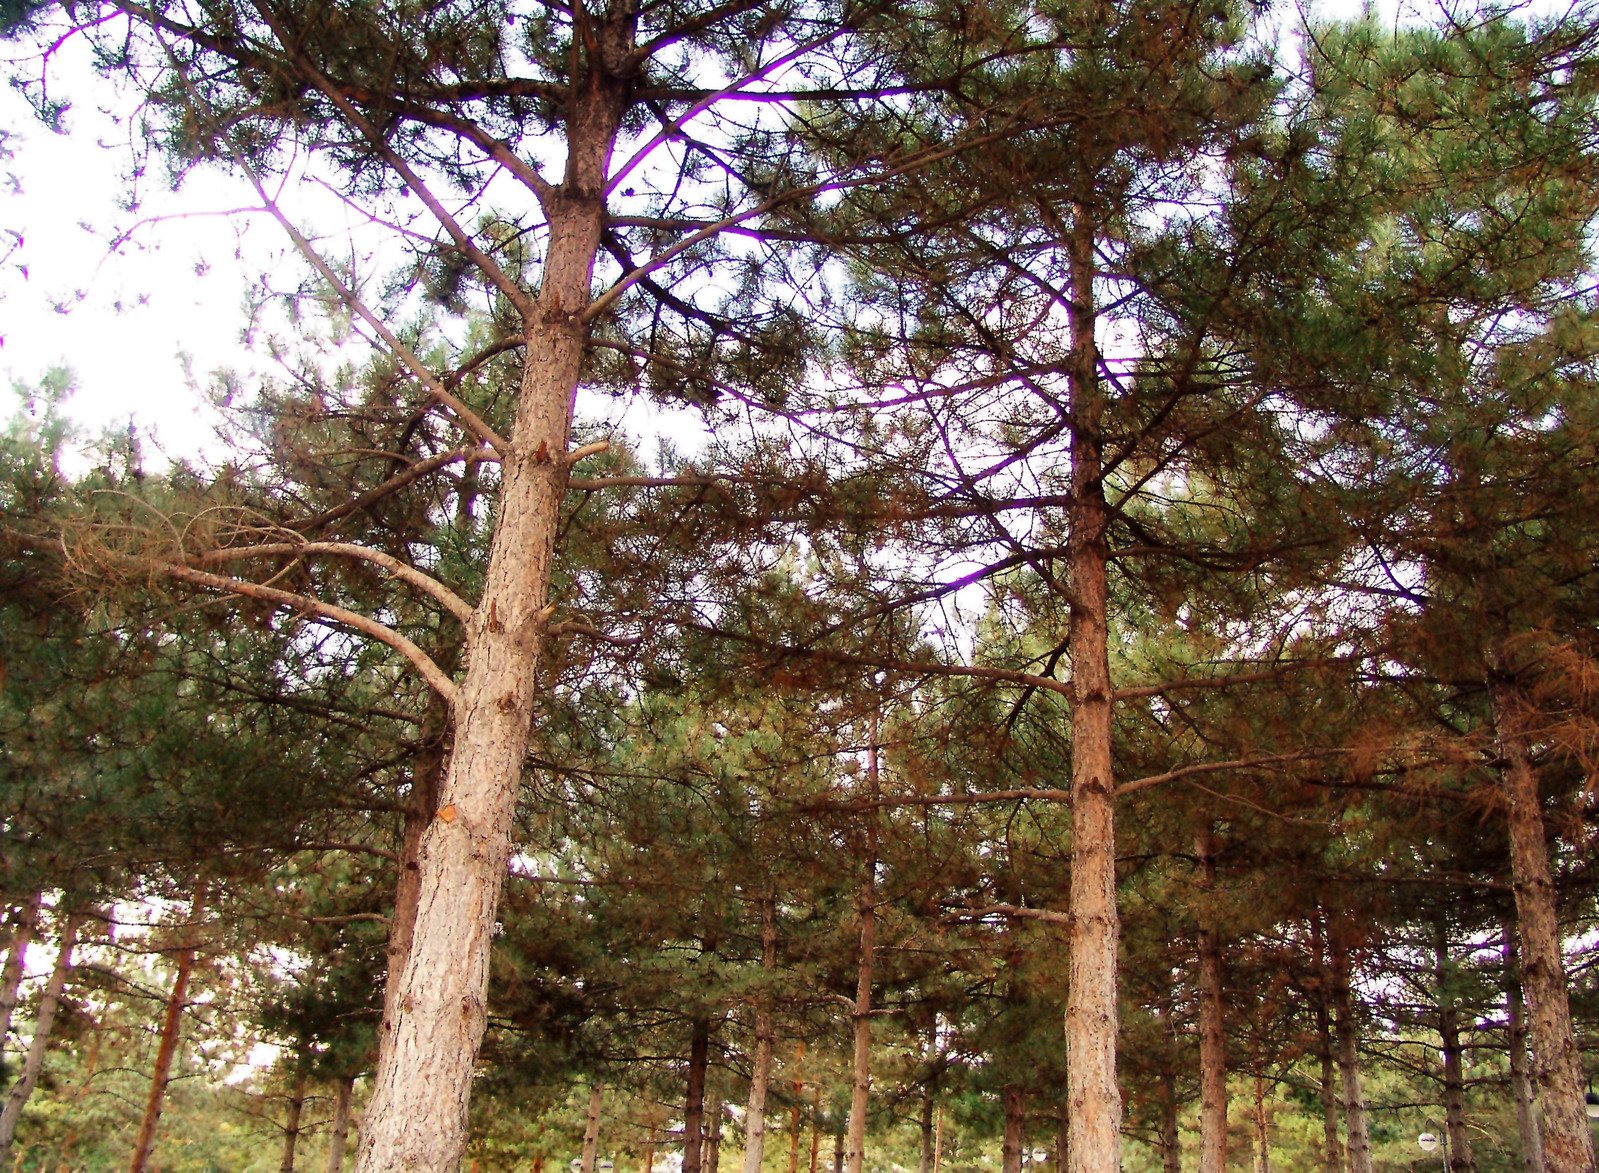 trees on a wooded area are shown against the sky